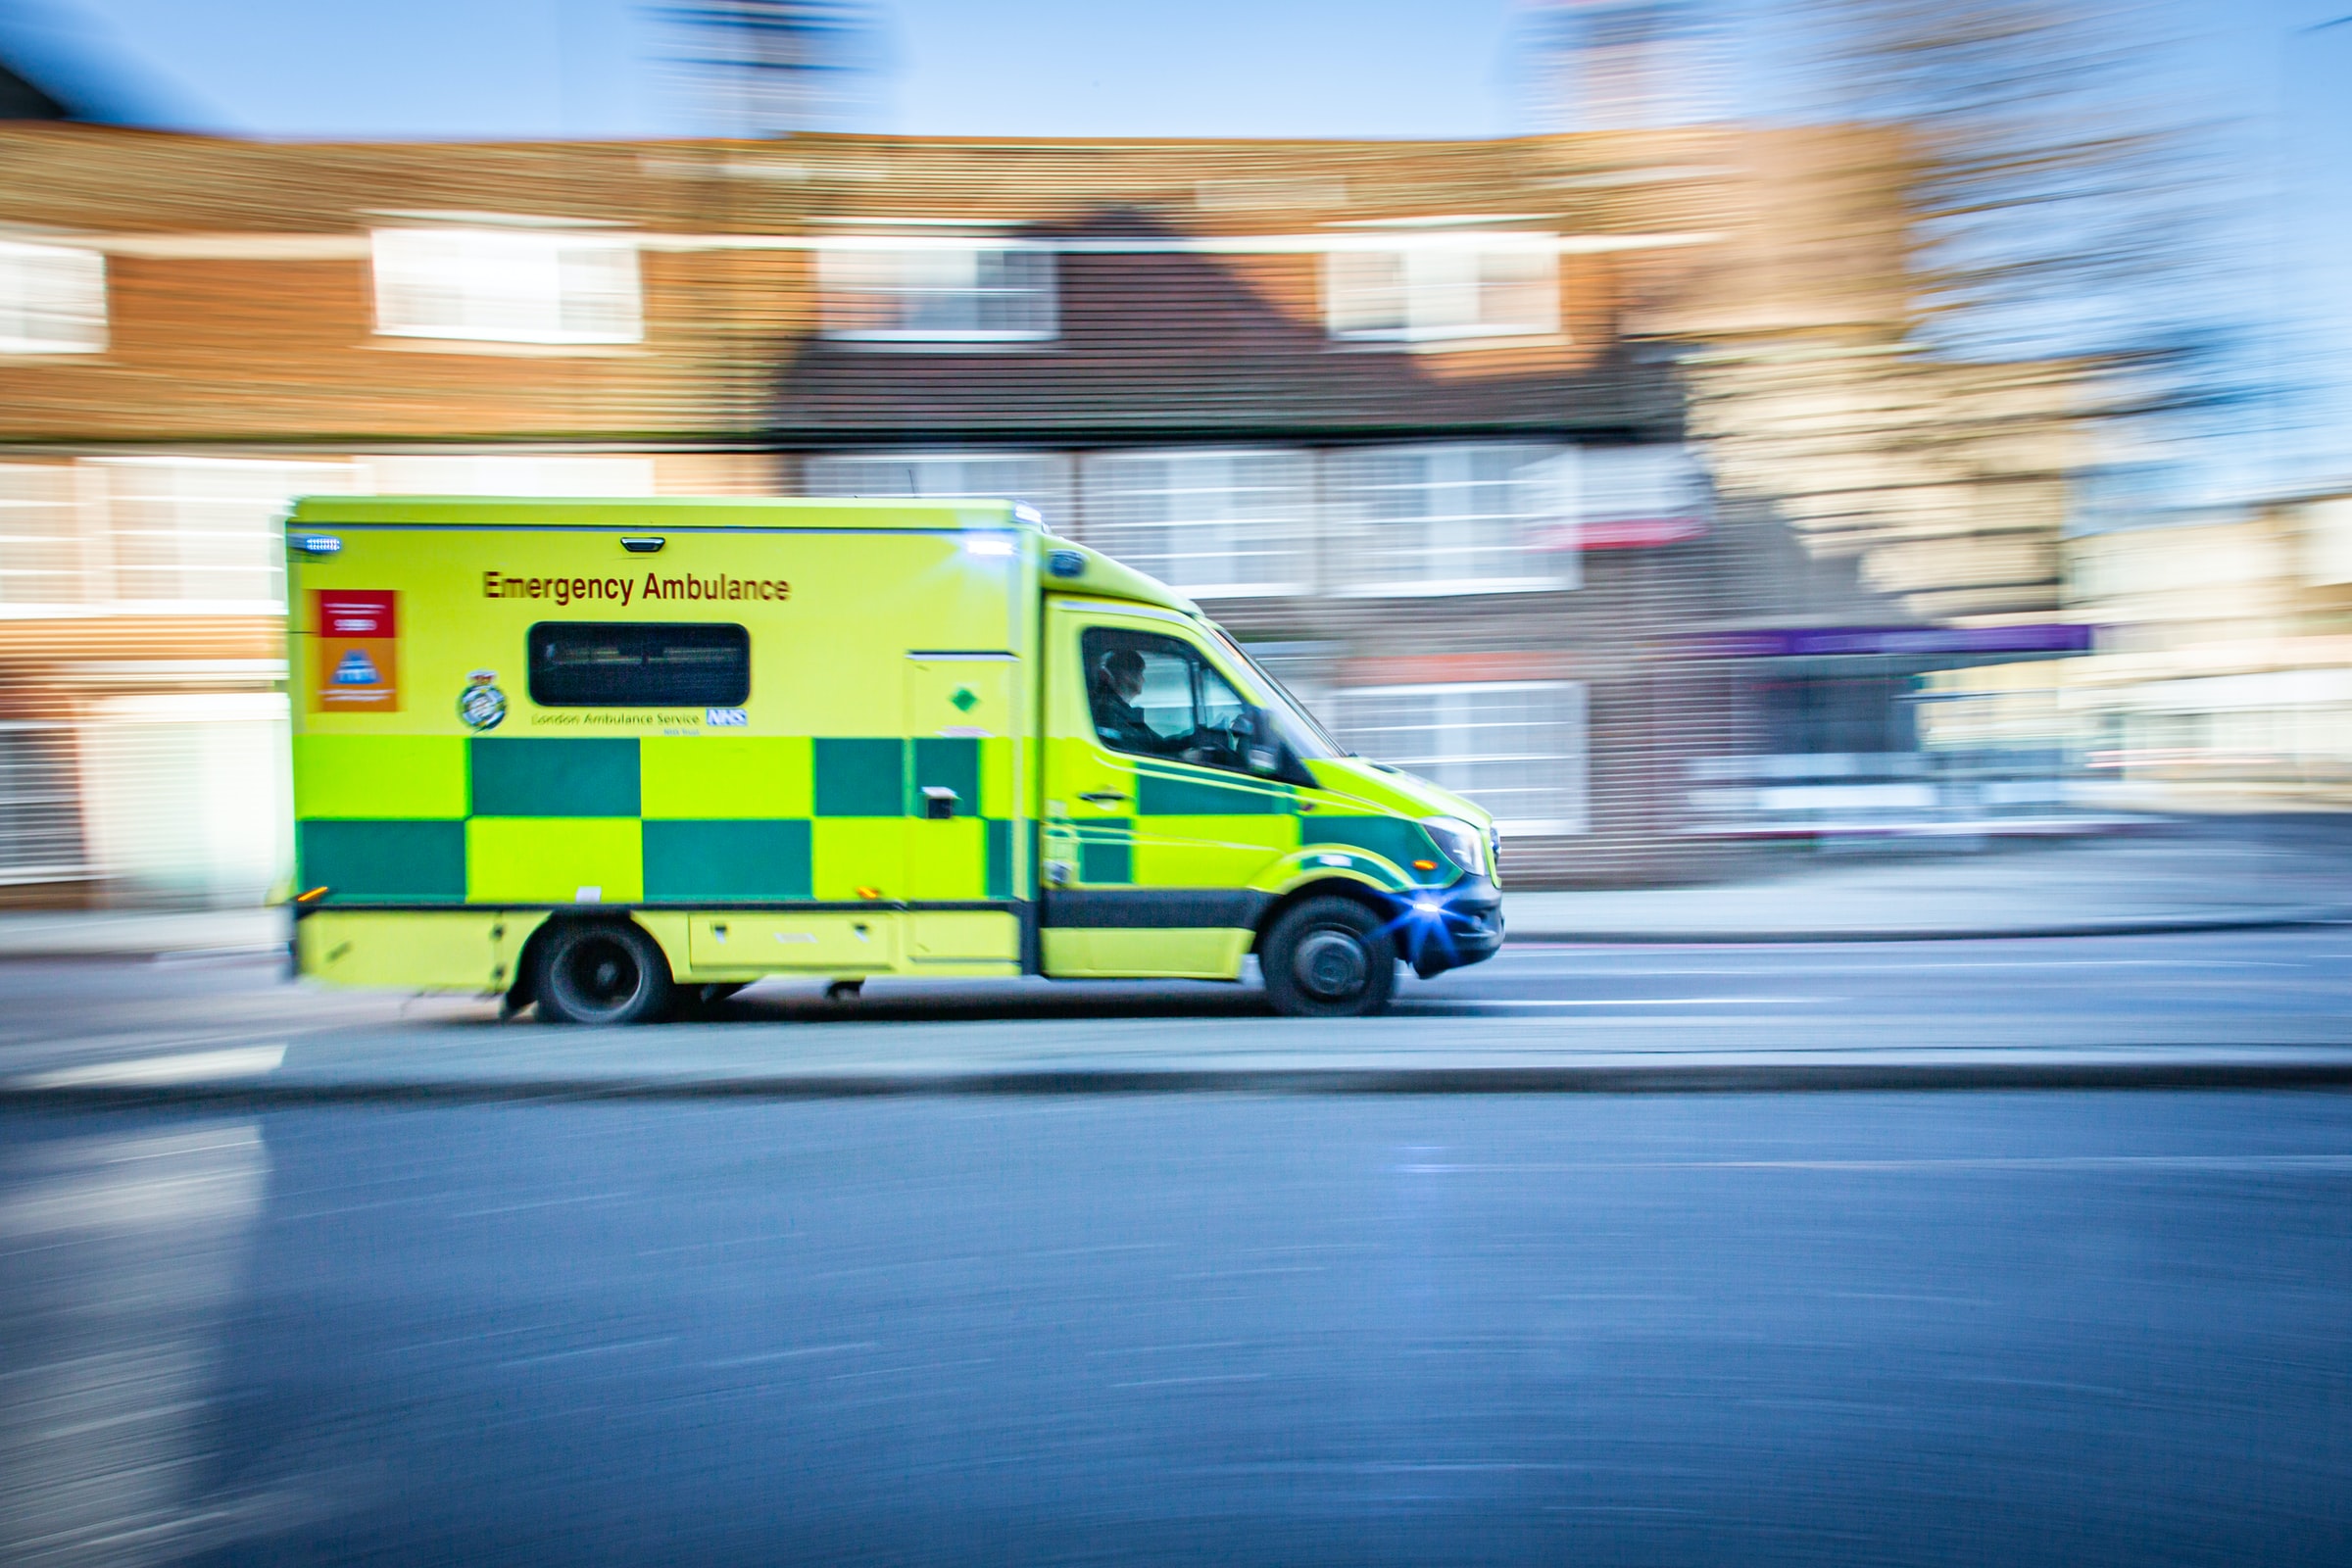 An ambulance viewed from the side with a house in the background; the image is heavily motion-blurred.